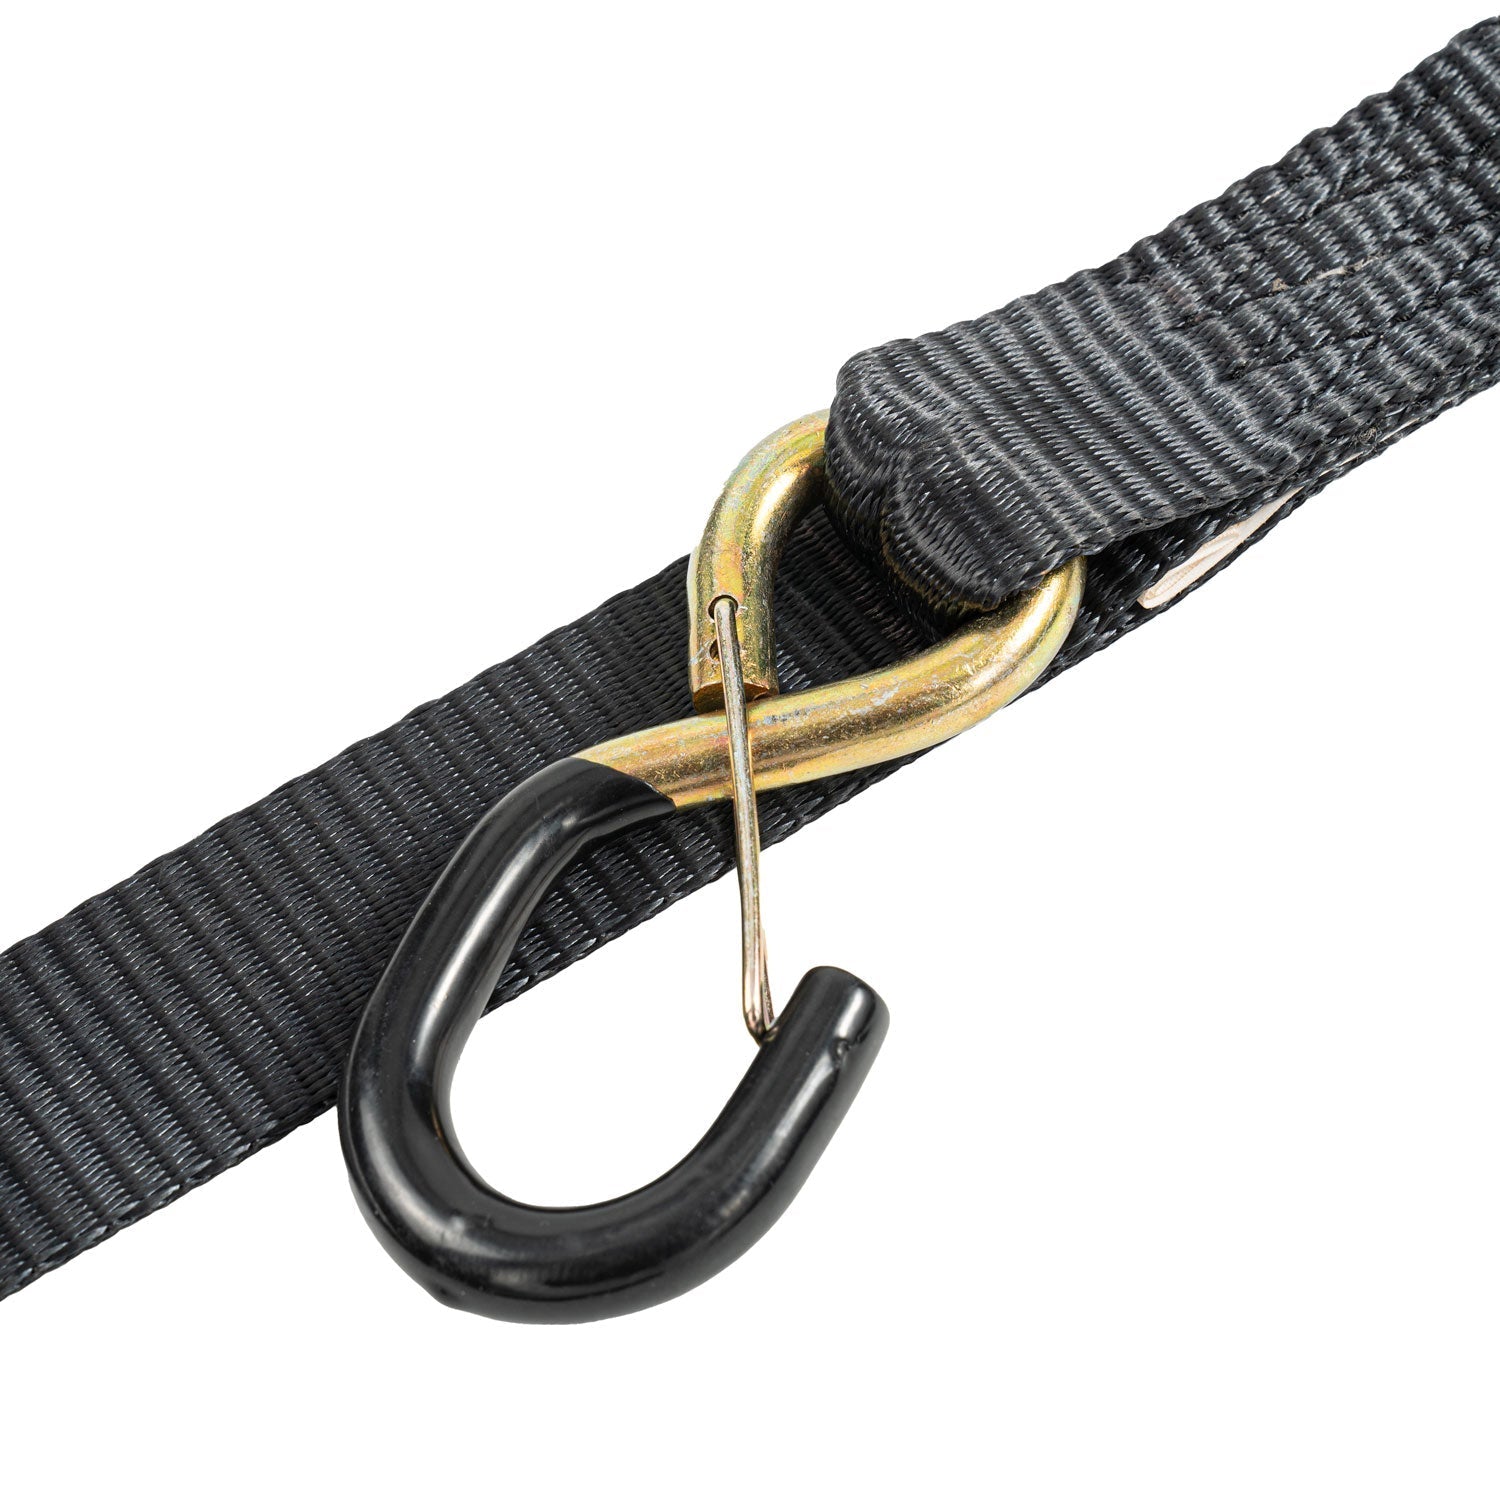 15ft x 1.5in ANCHOR STRAPS Ratchet Strap: 1000lb WLL, 3,000lb Break Strength - The Perfect Bungee & ShockStrap Tie Downs